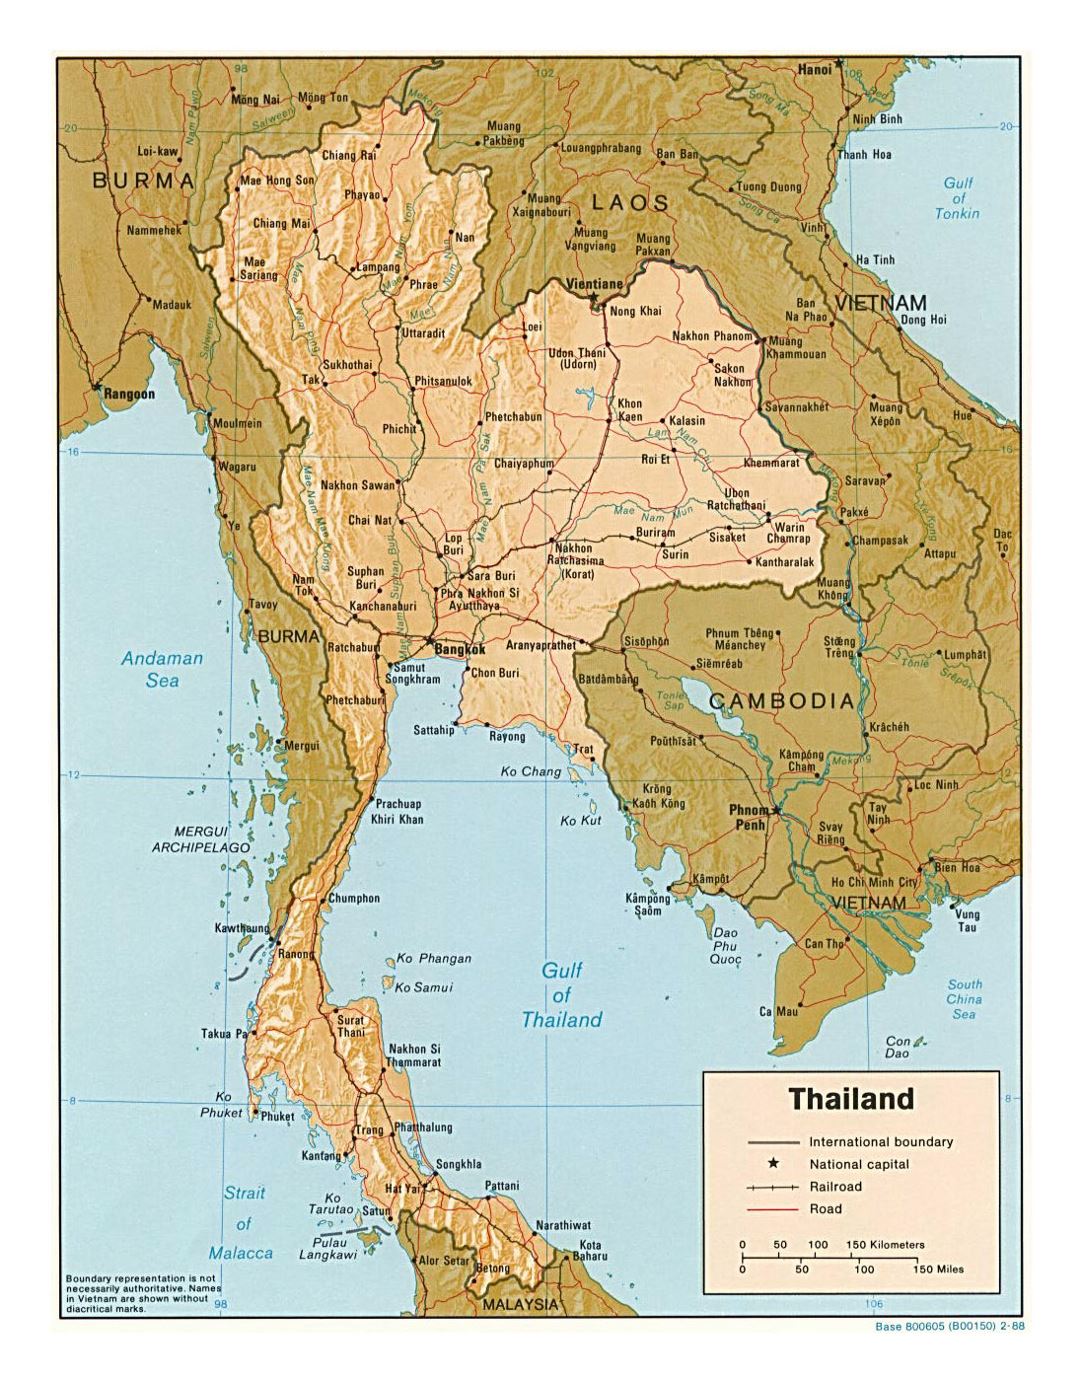 Detailed political map of Thailand with relief, roads, railorads and major cities - 1988